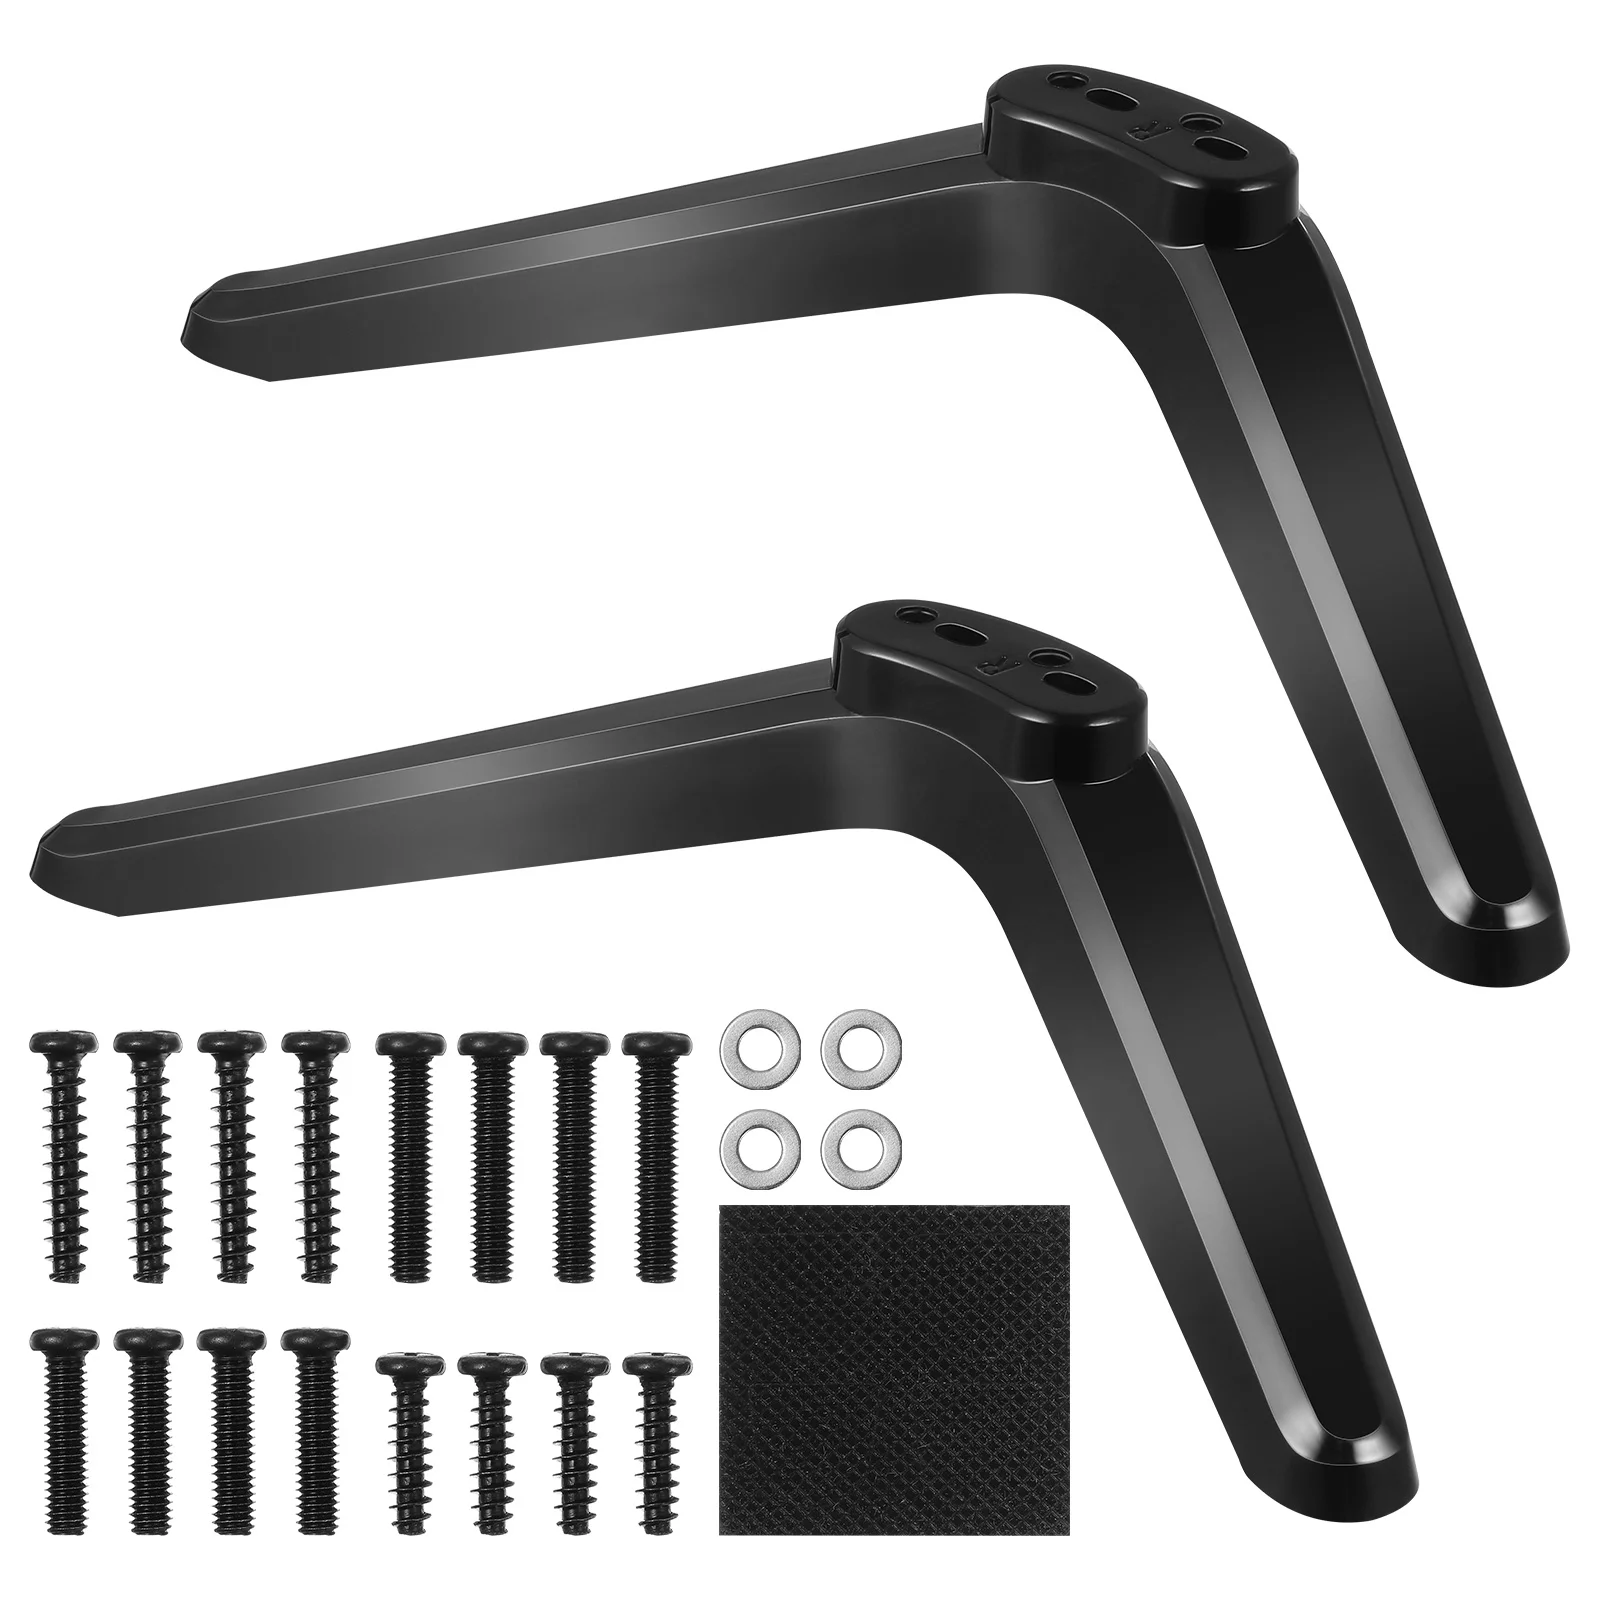 

2 Pcs Mount Stand Bracket Holder Television Mounting Desk With Mounts Plastic Stands